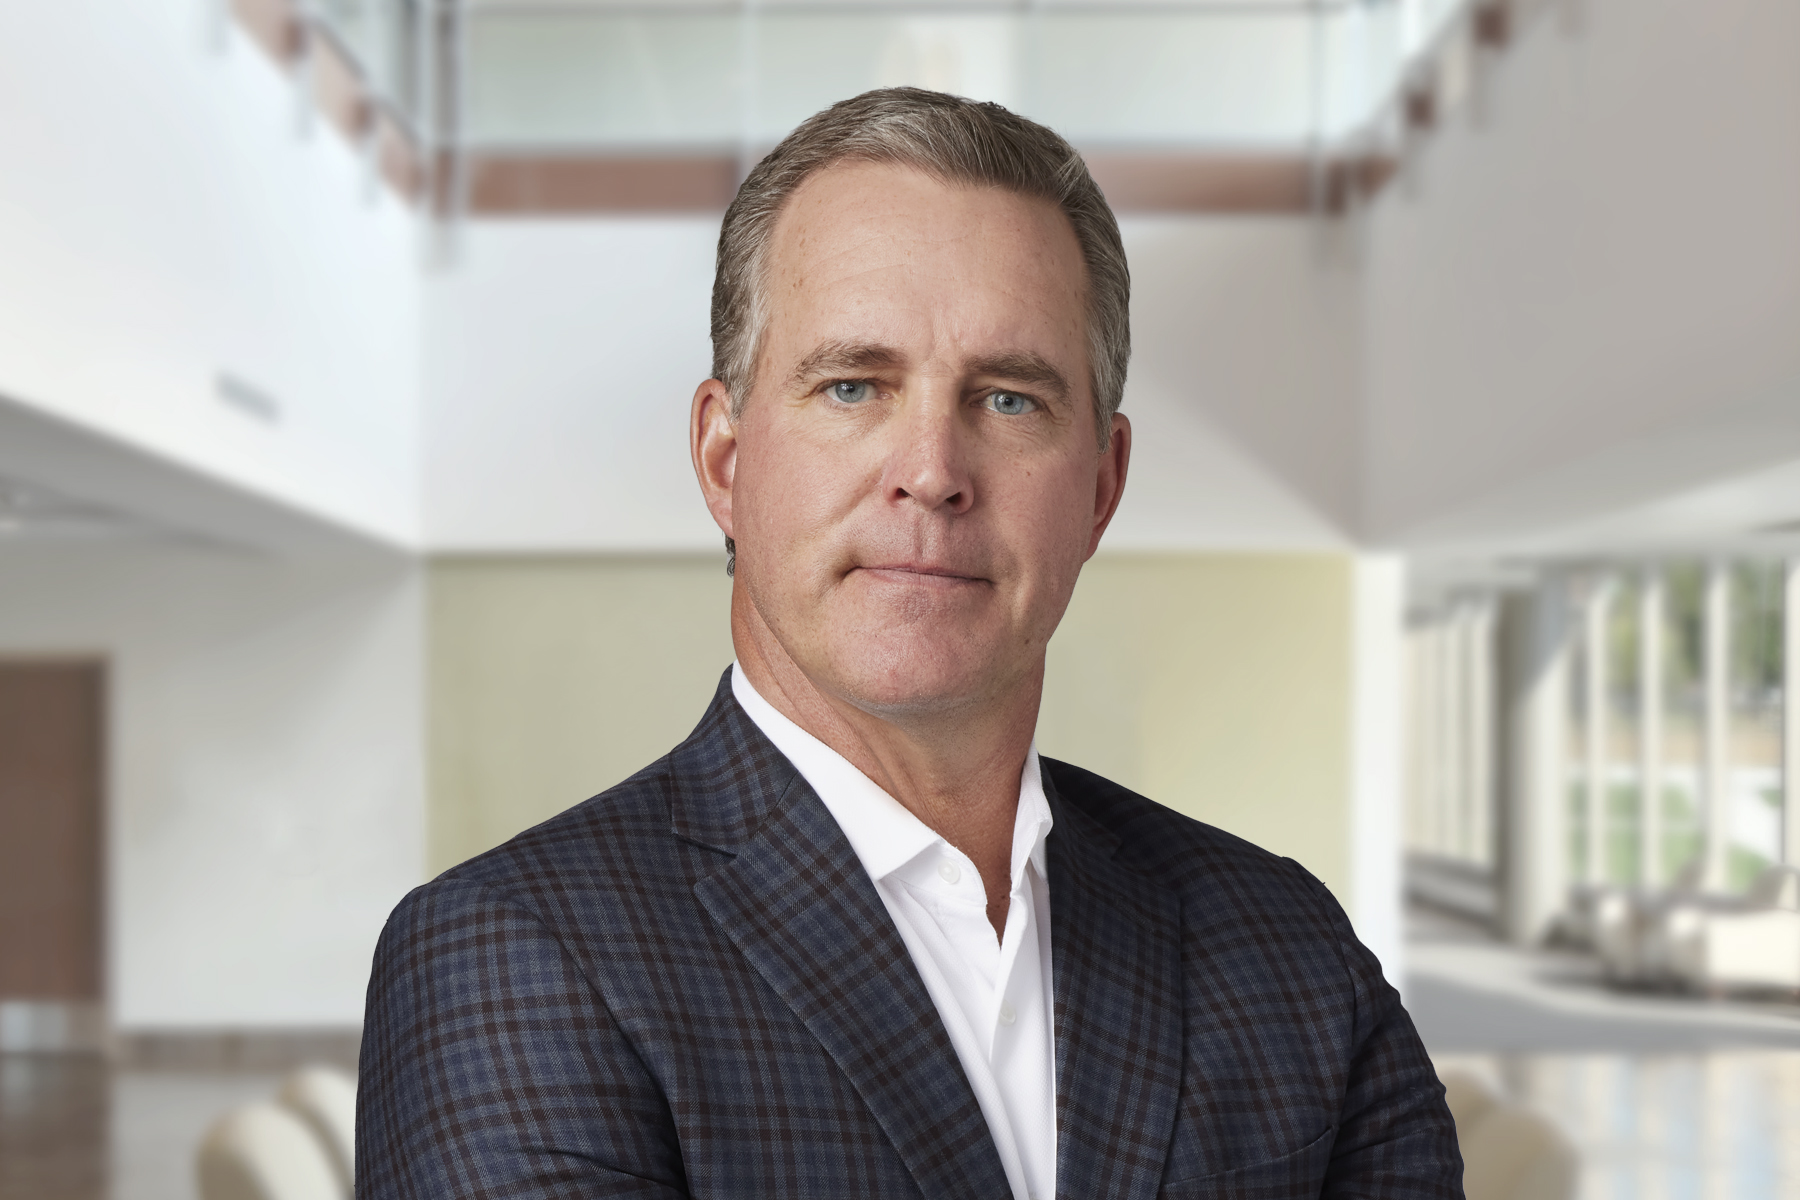 Ryan Companies Hires Mark Sims As Vice President Of Real Estate Development In Southwest Region